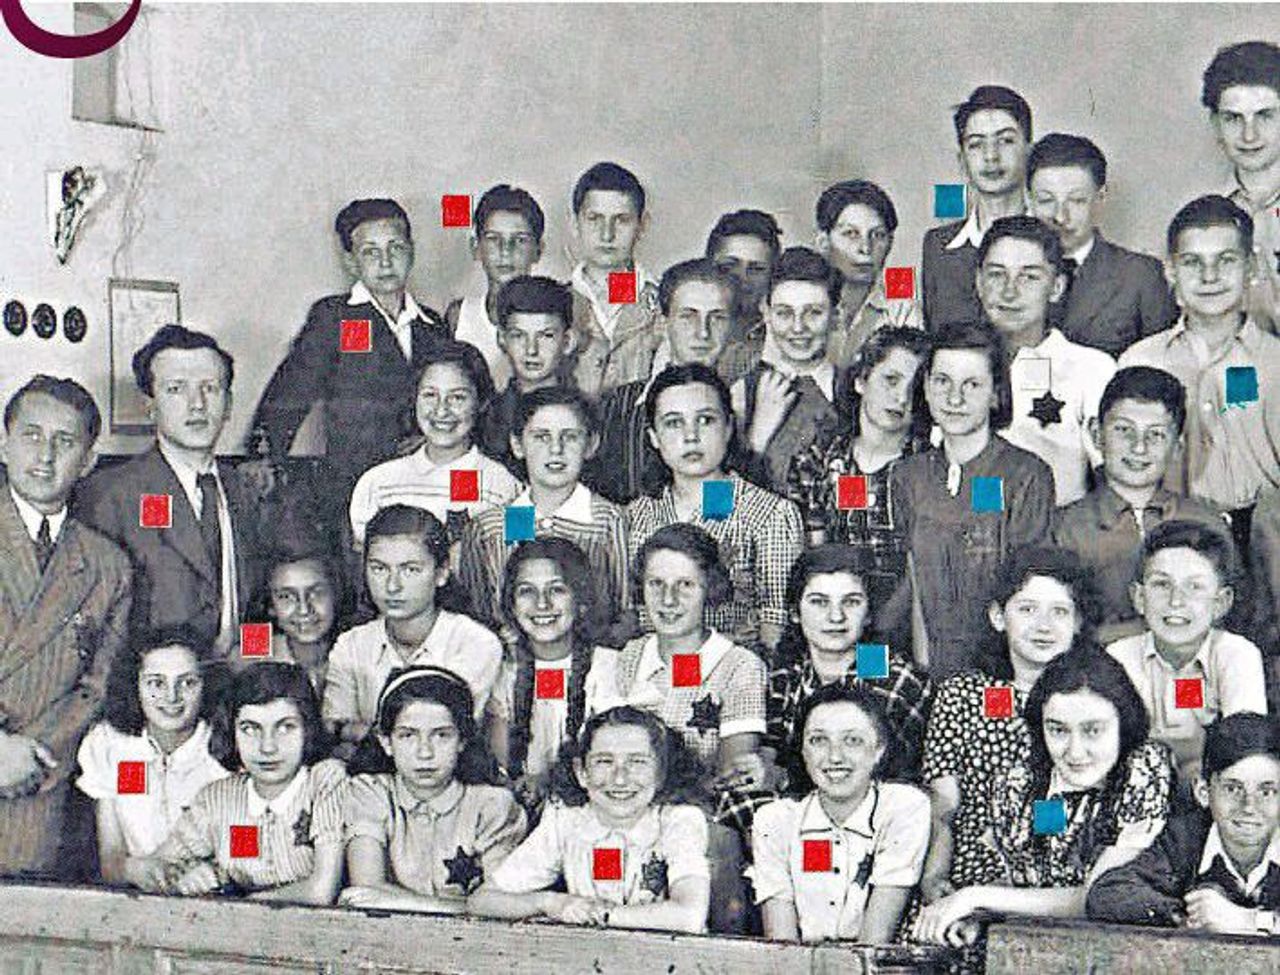 Frank Bright 1942 Prague school photo - those marked red died